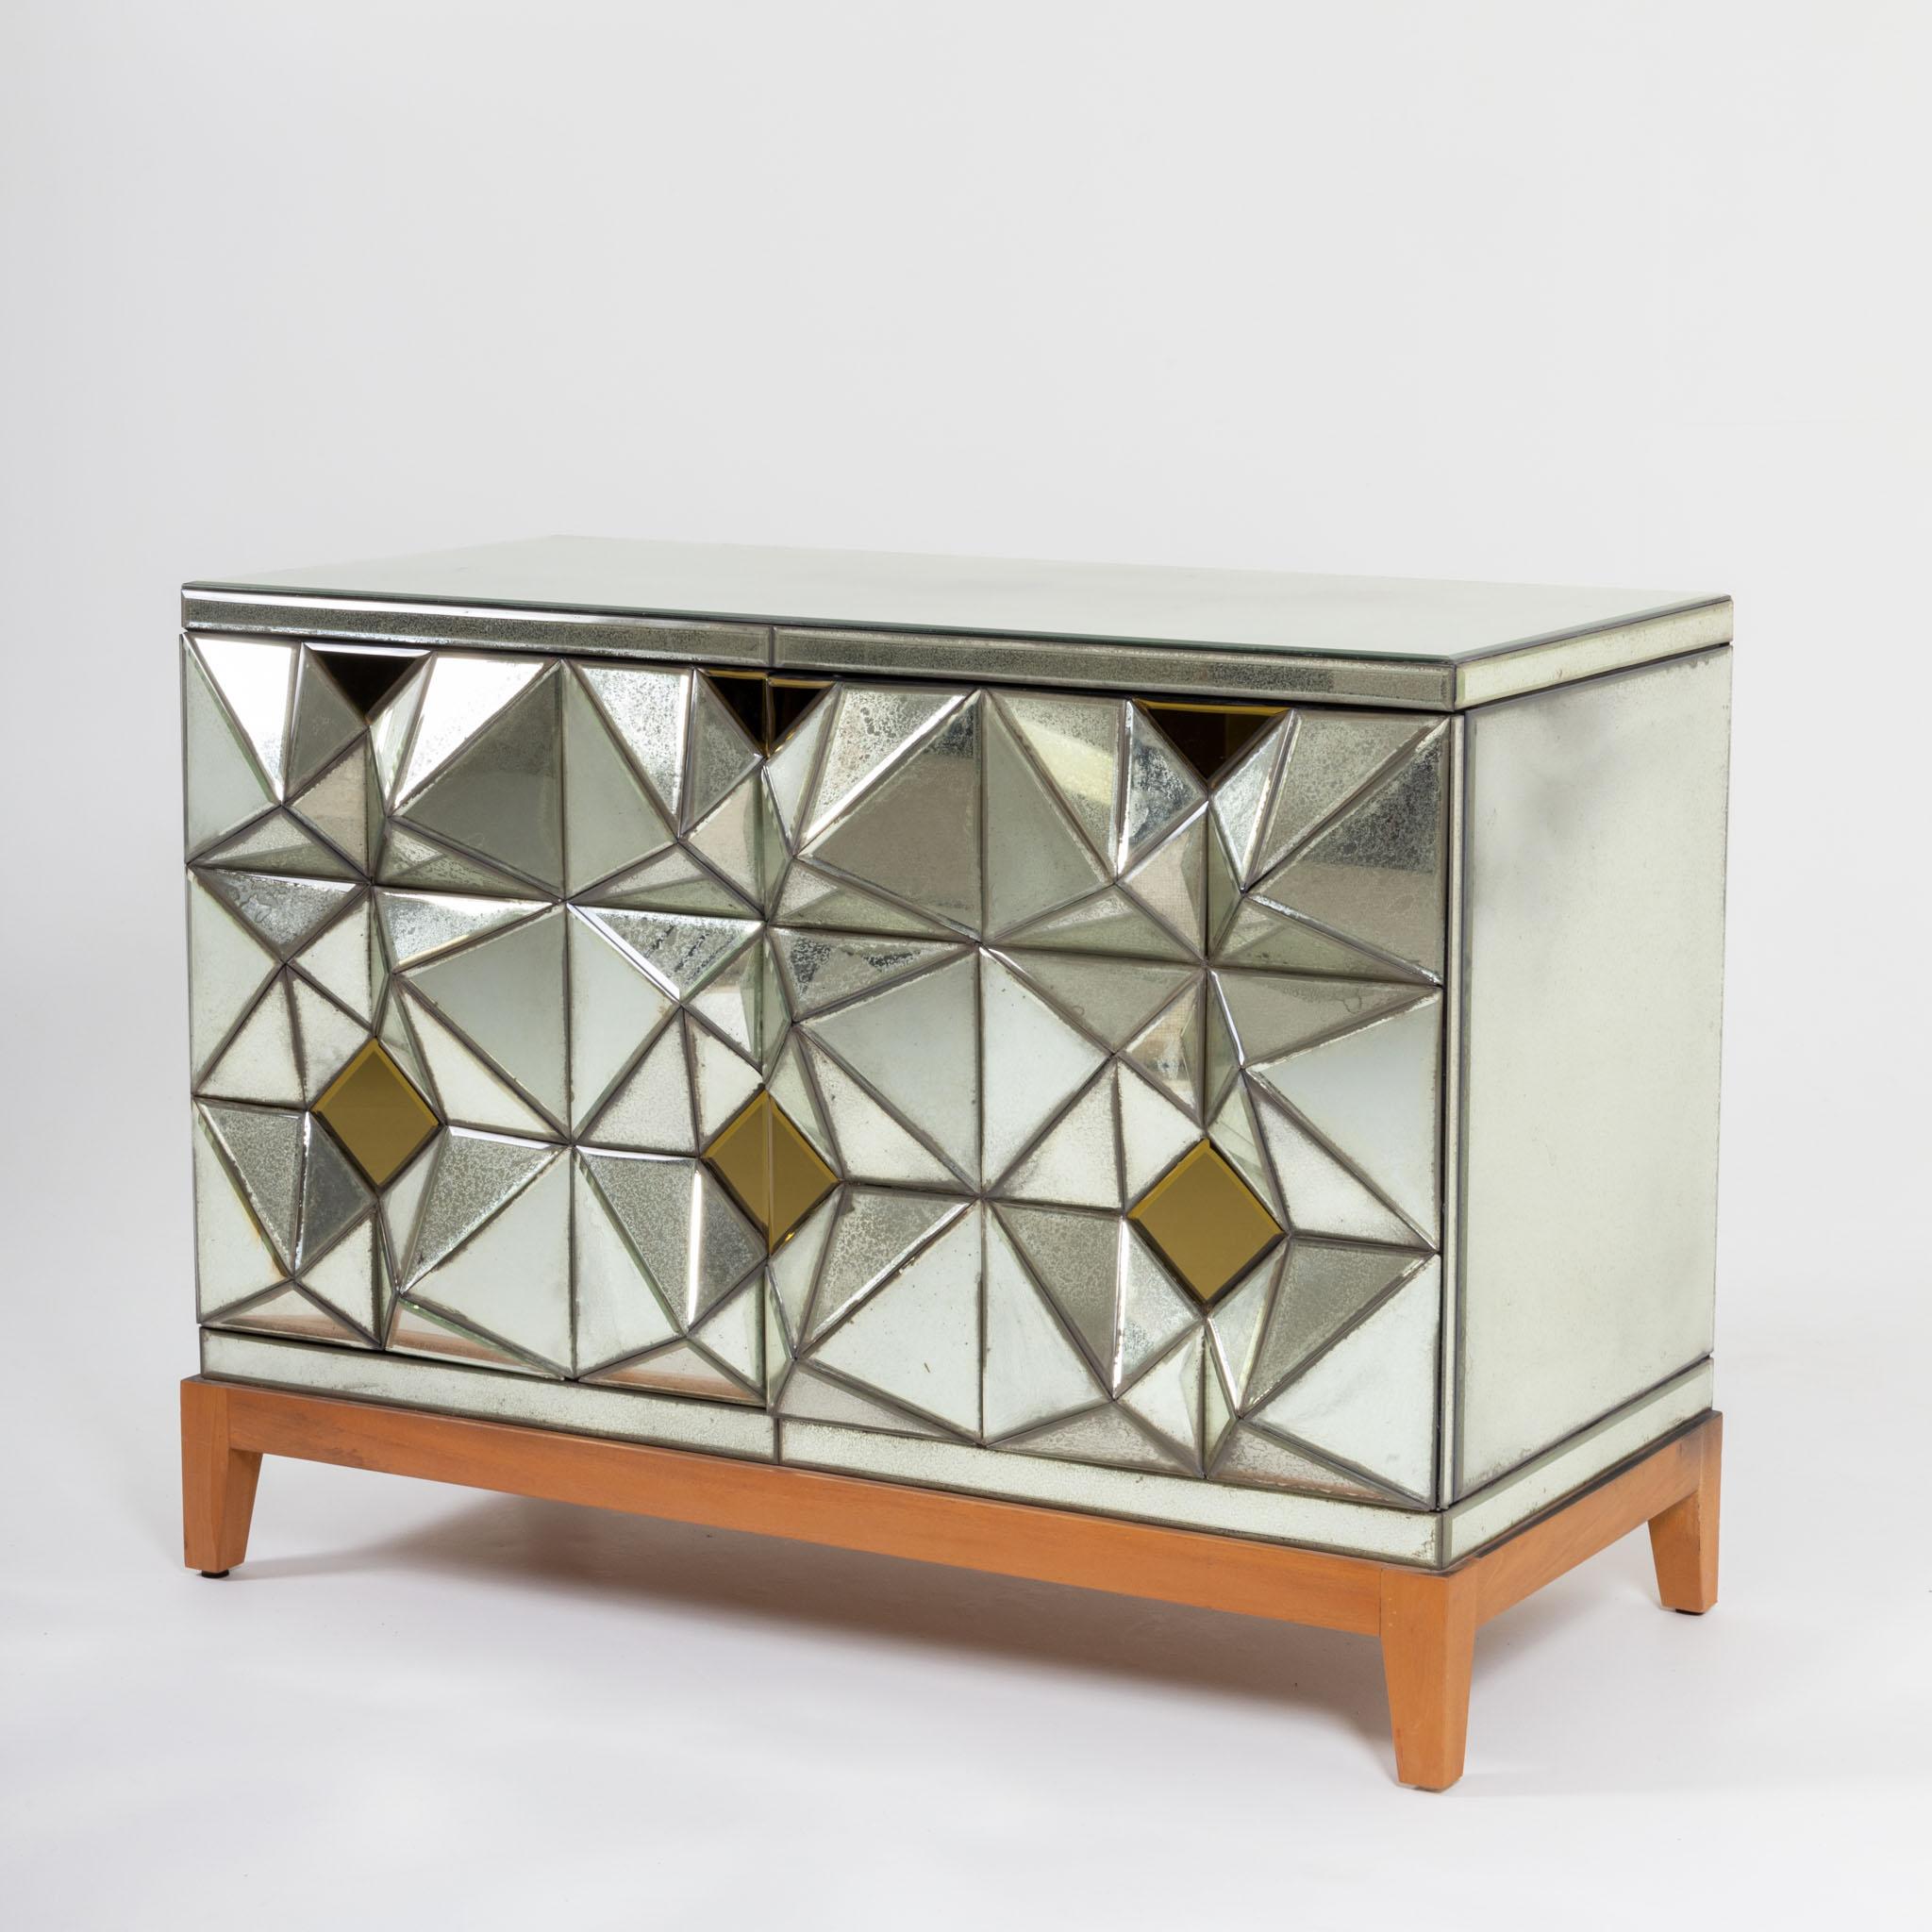 Two-door sideboard in the neo-vintage style by Olivier de Schrijver from the Ode's Design series with triangular or square discs, which are arranged in pyramids and thus create a concave-convex mirror surface. Inscribed, signed and numbered on the